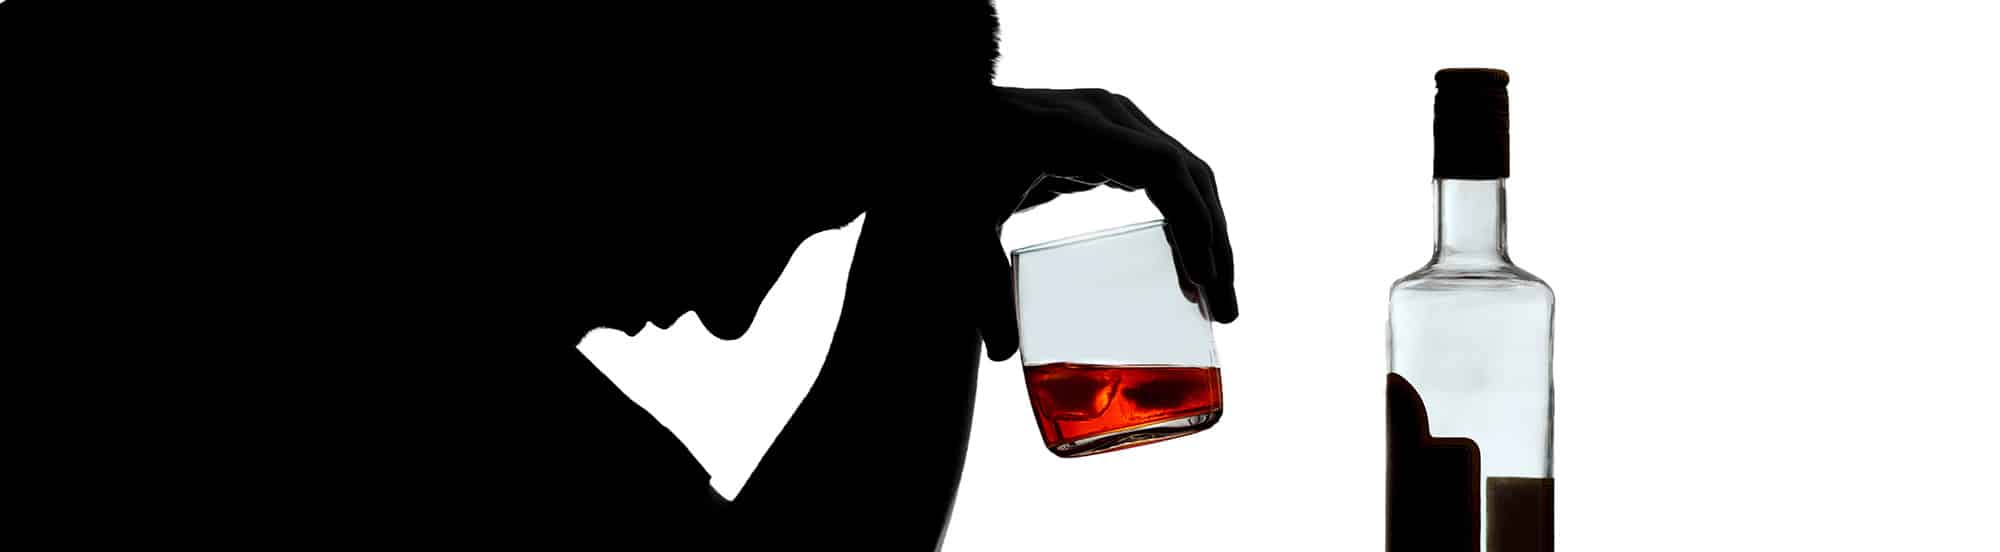 black side profile of person with head on hand and glass of whiskey in hand and bottle of liquor nearby